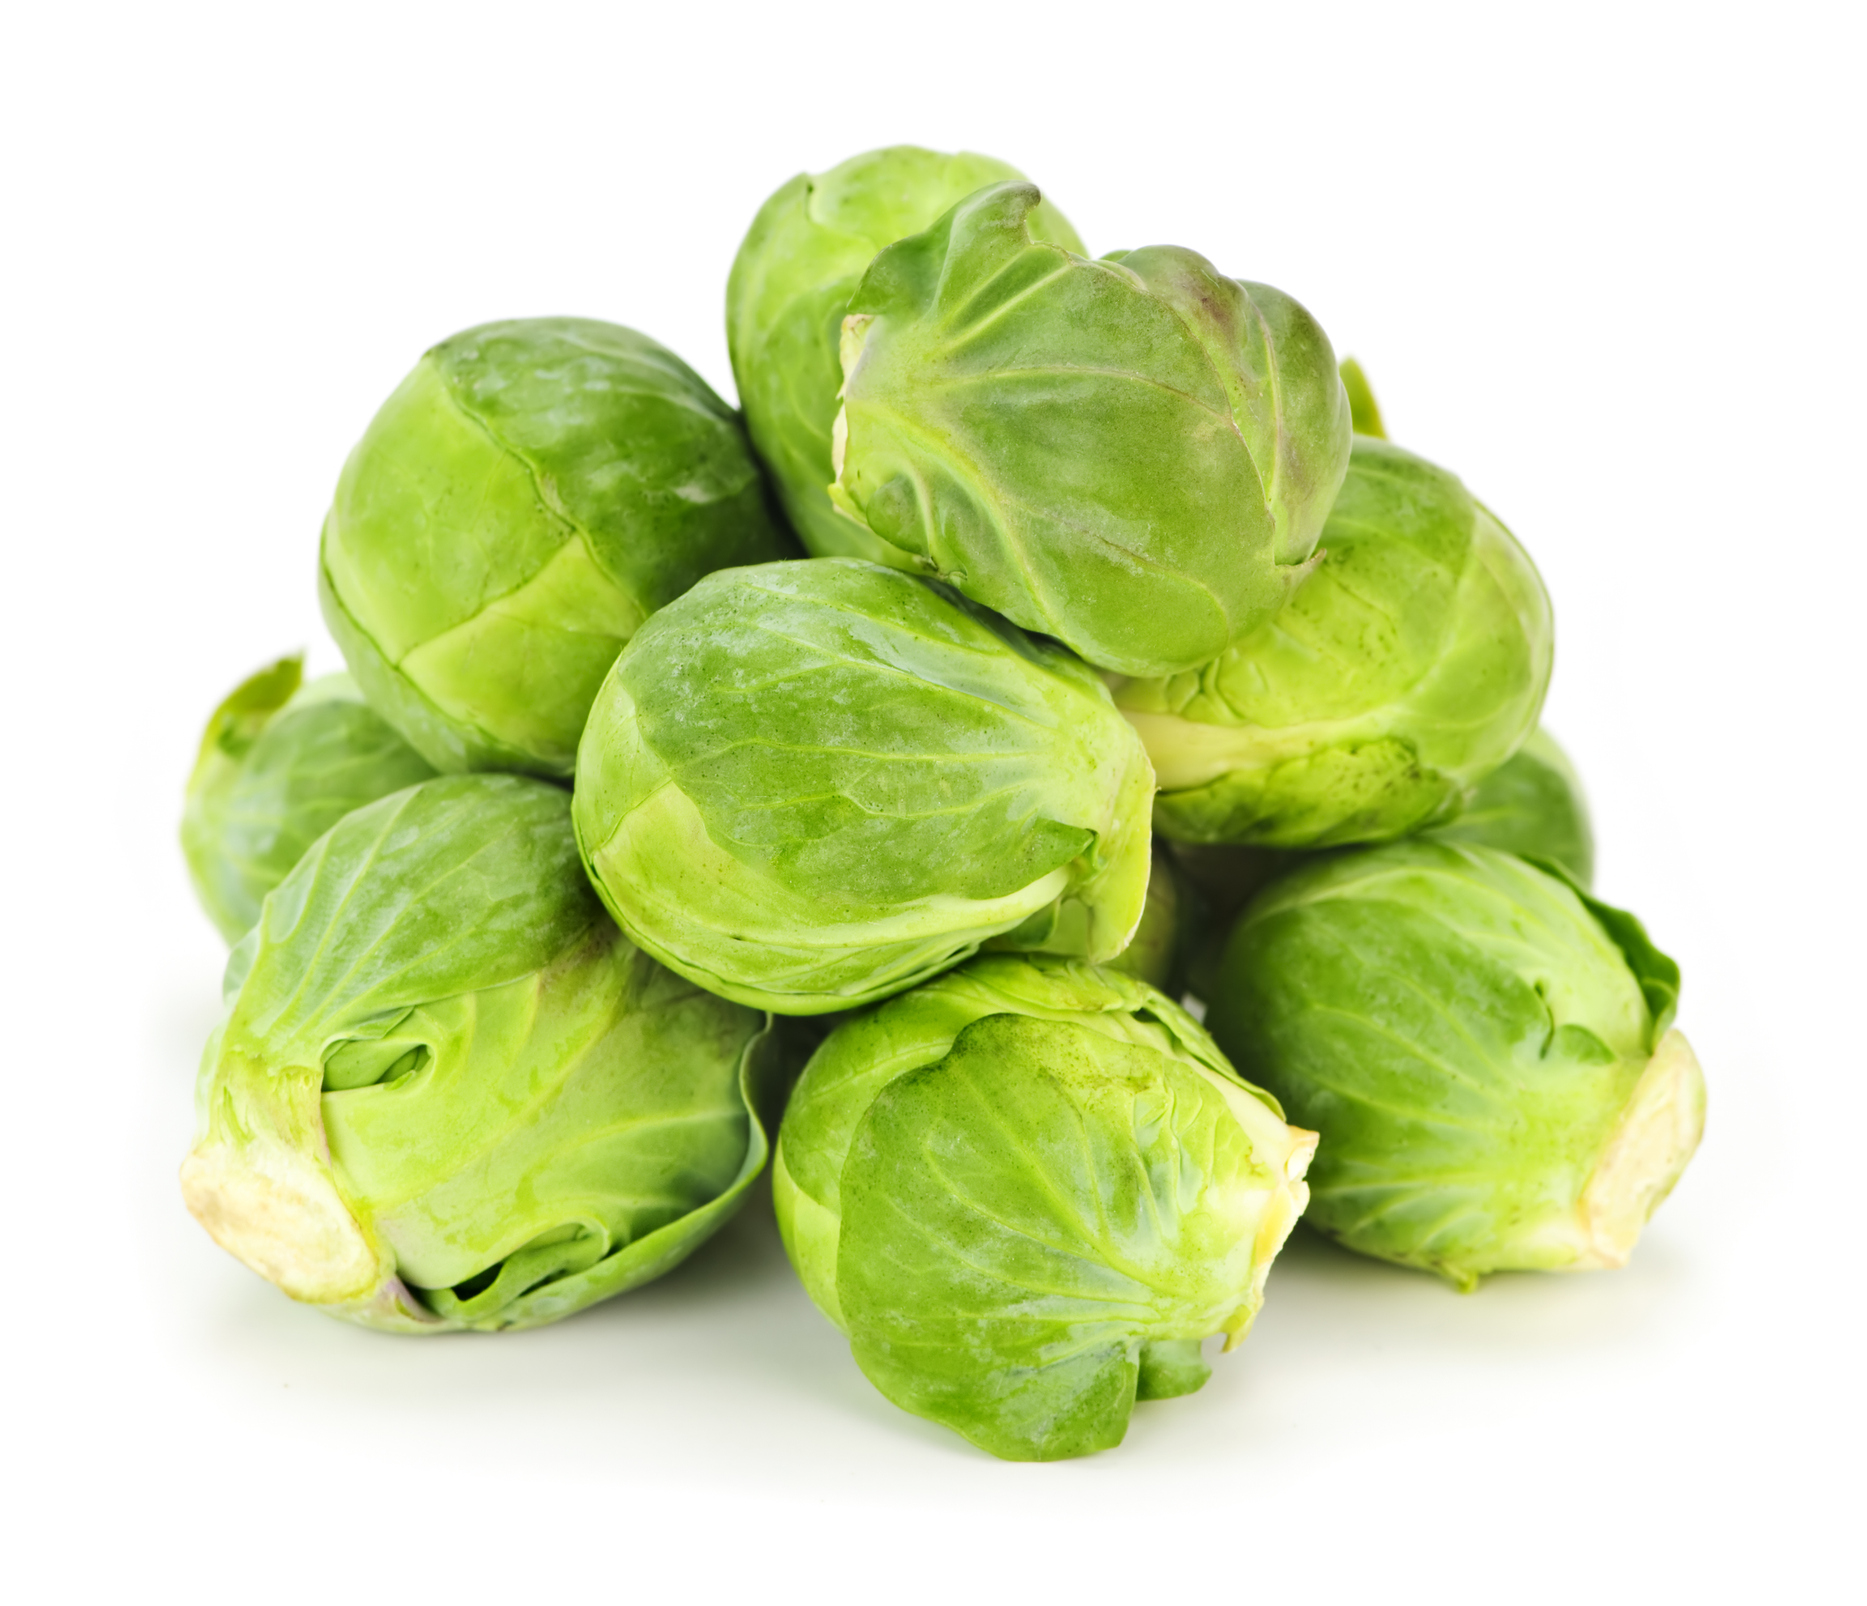 Are Brussels Sprouts Good For Dogs?